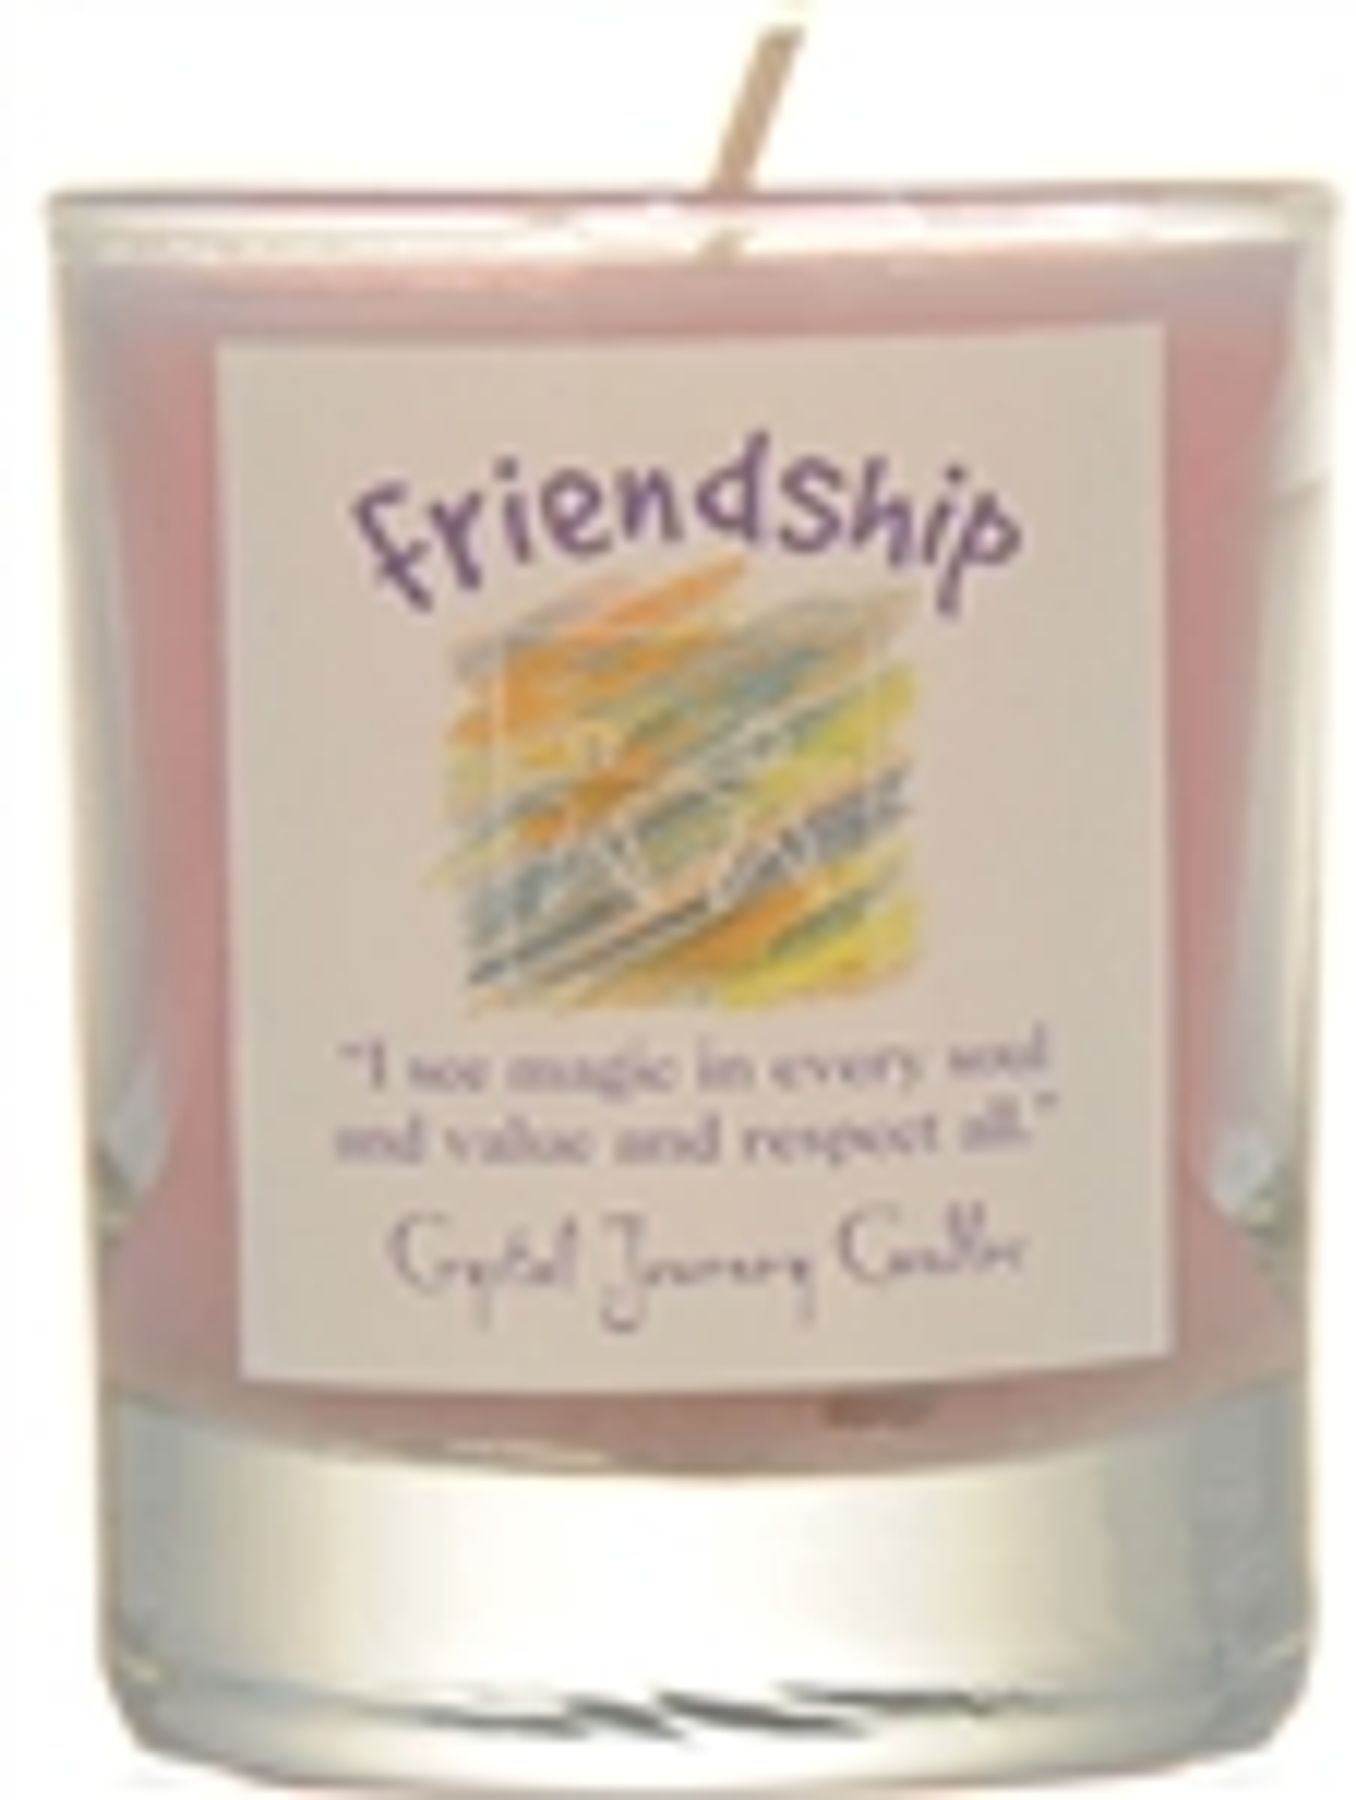 Herbal Votive Holder Filled with Soy Wax Friendship